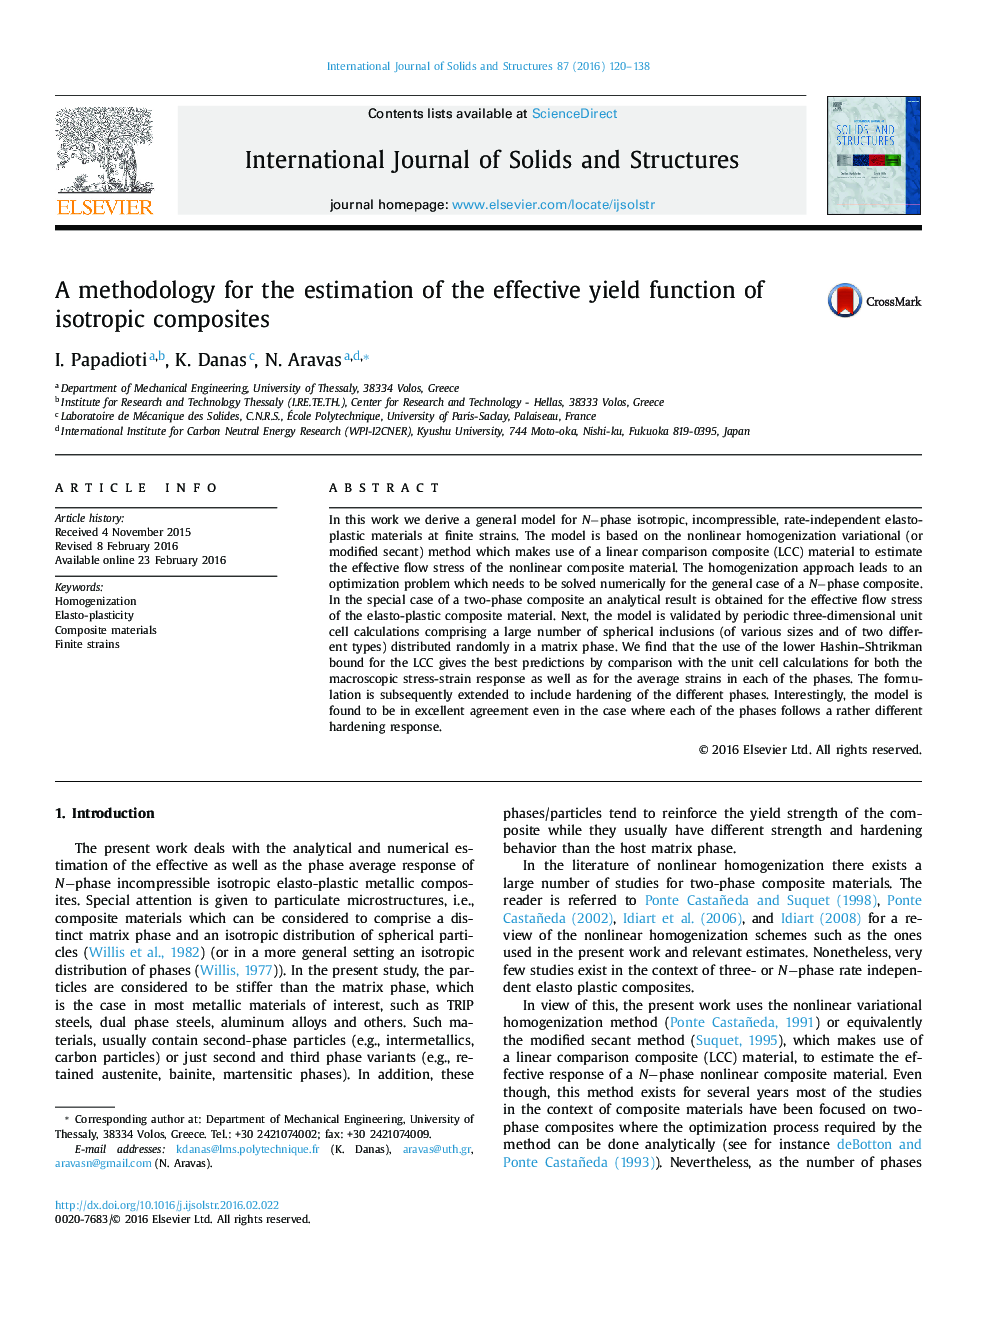 A methodology for the estimation of the effective yield function of isotropic composites